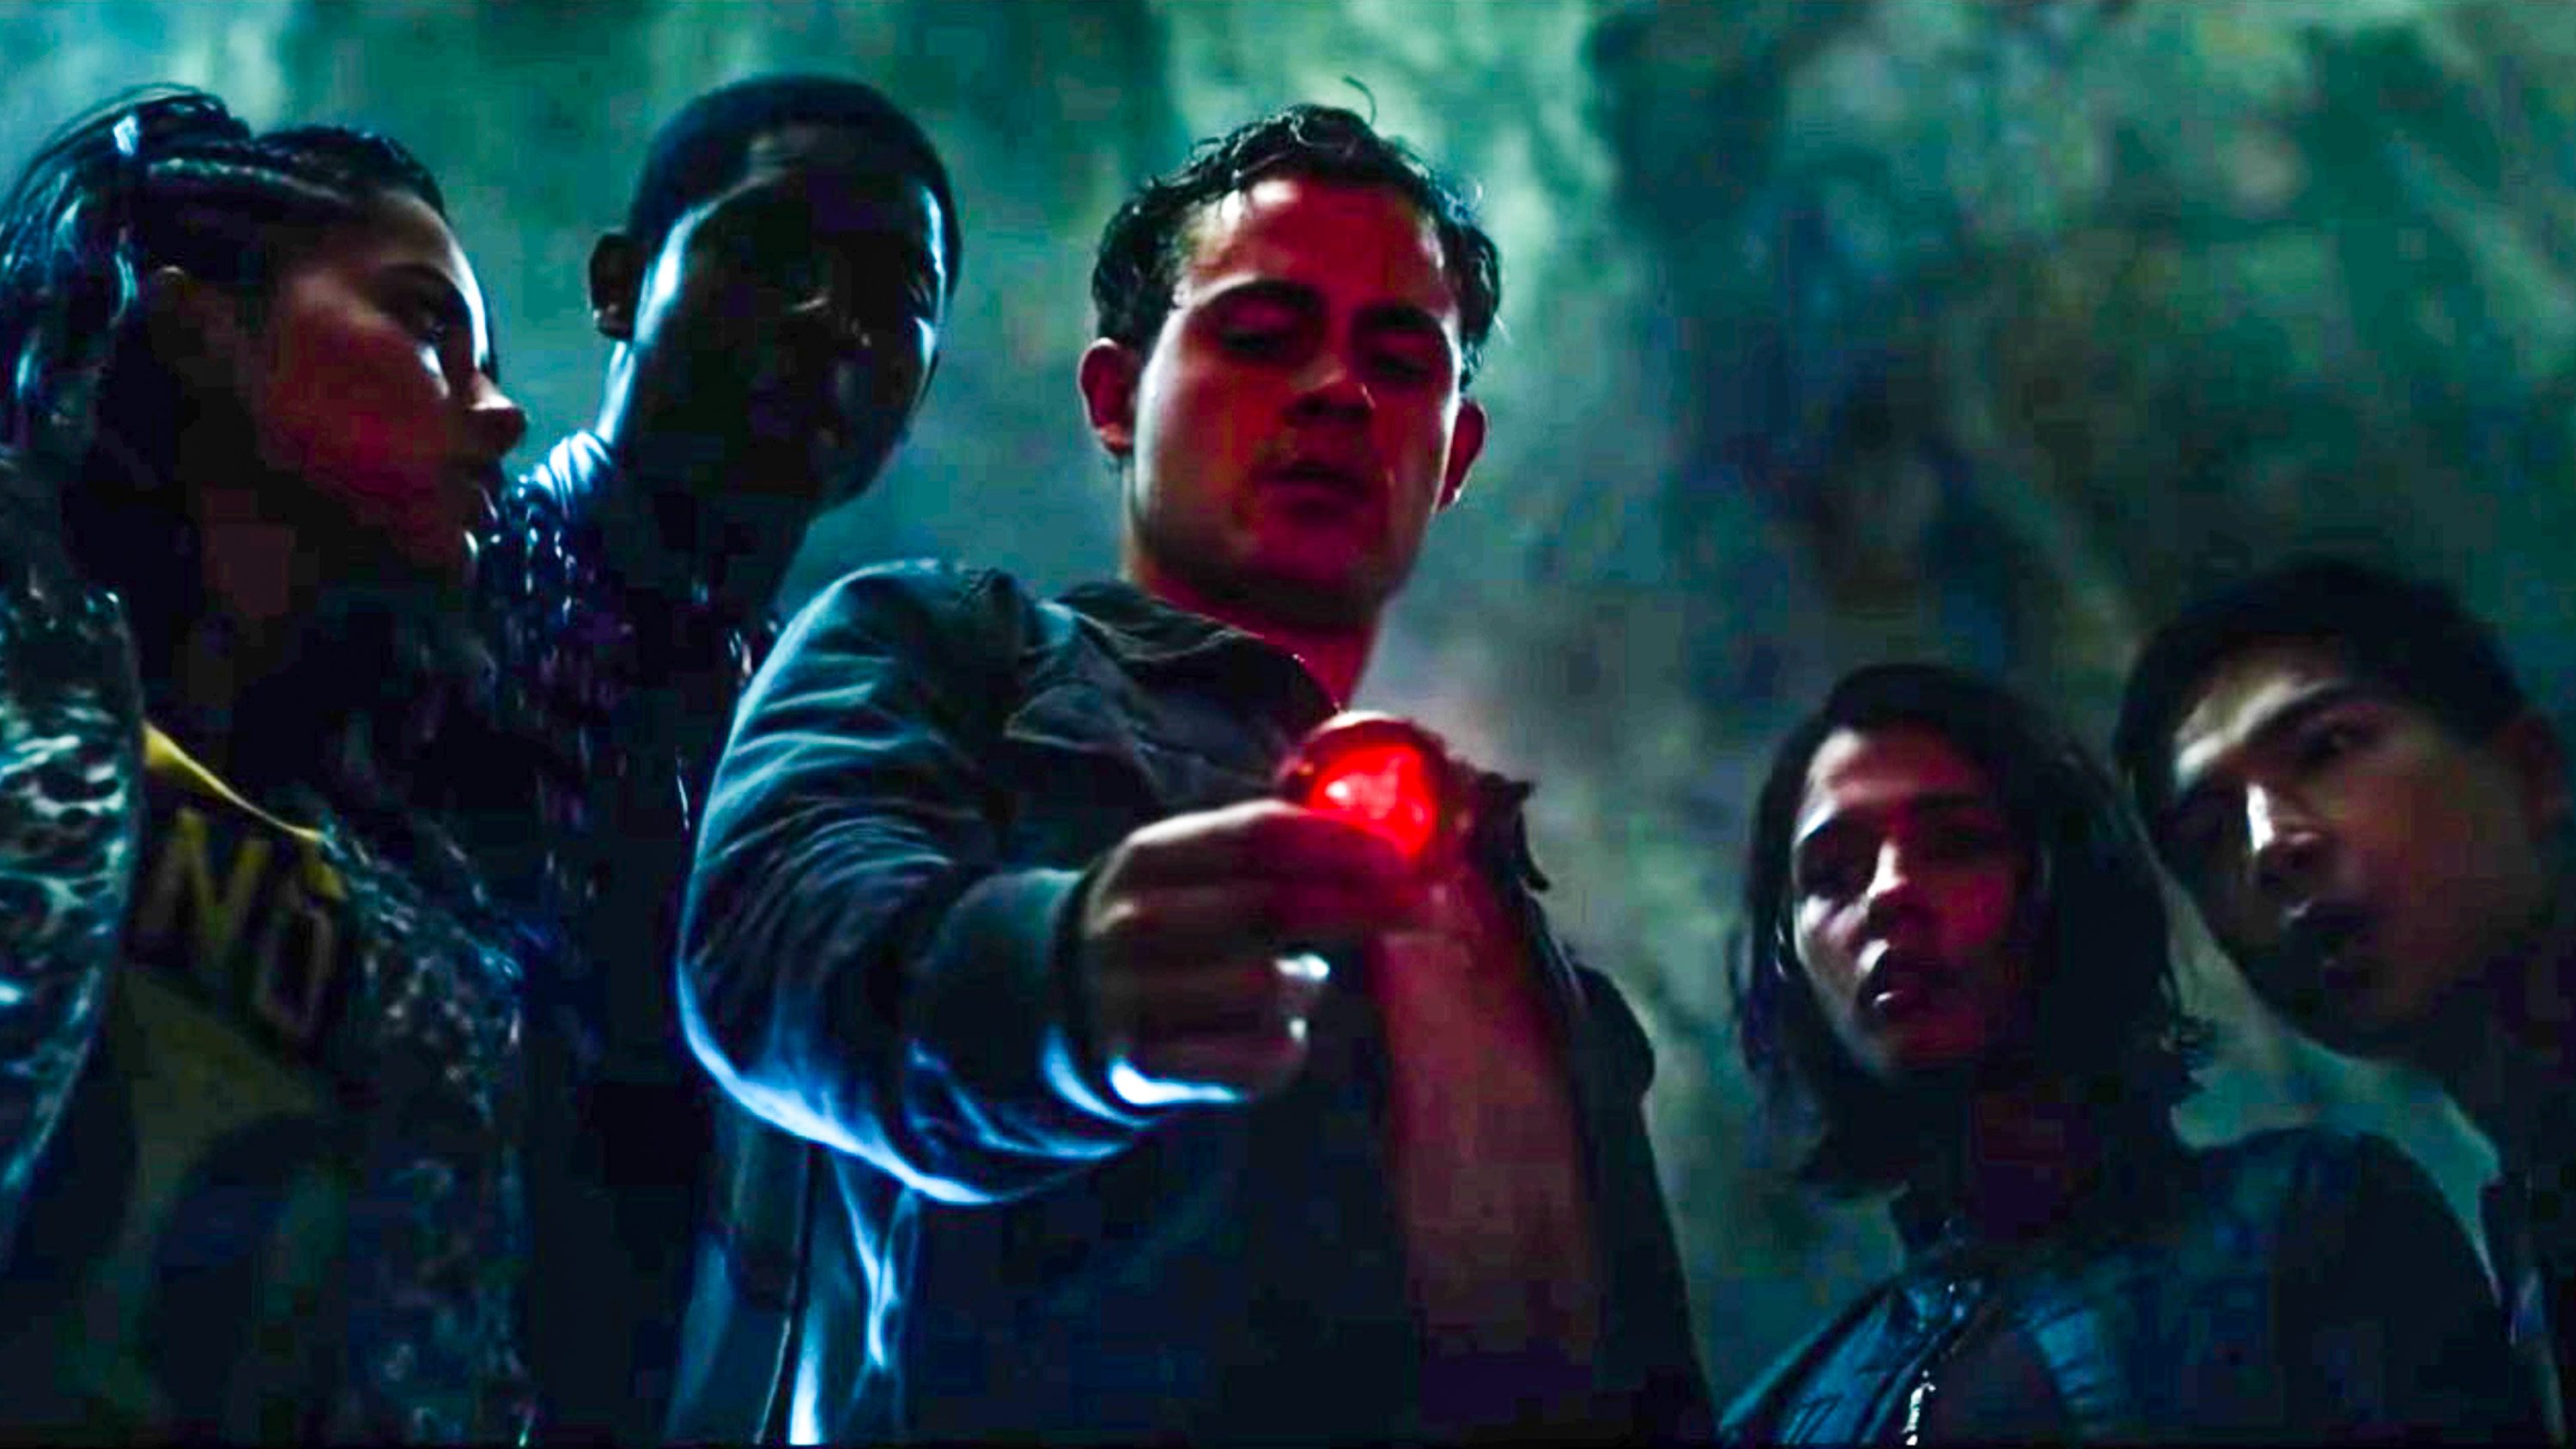 'POWER RANGERS.' The first trailer for the 2017 reboot of 'Power Rangers' gives a peek at how the team gets their powers. Screengrab from YouTube/Lionsgate Movies  